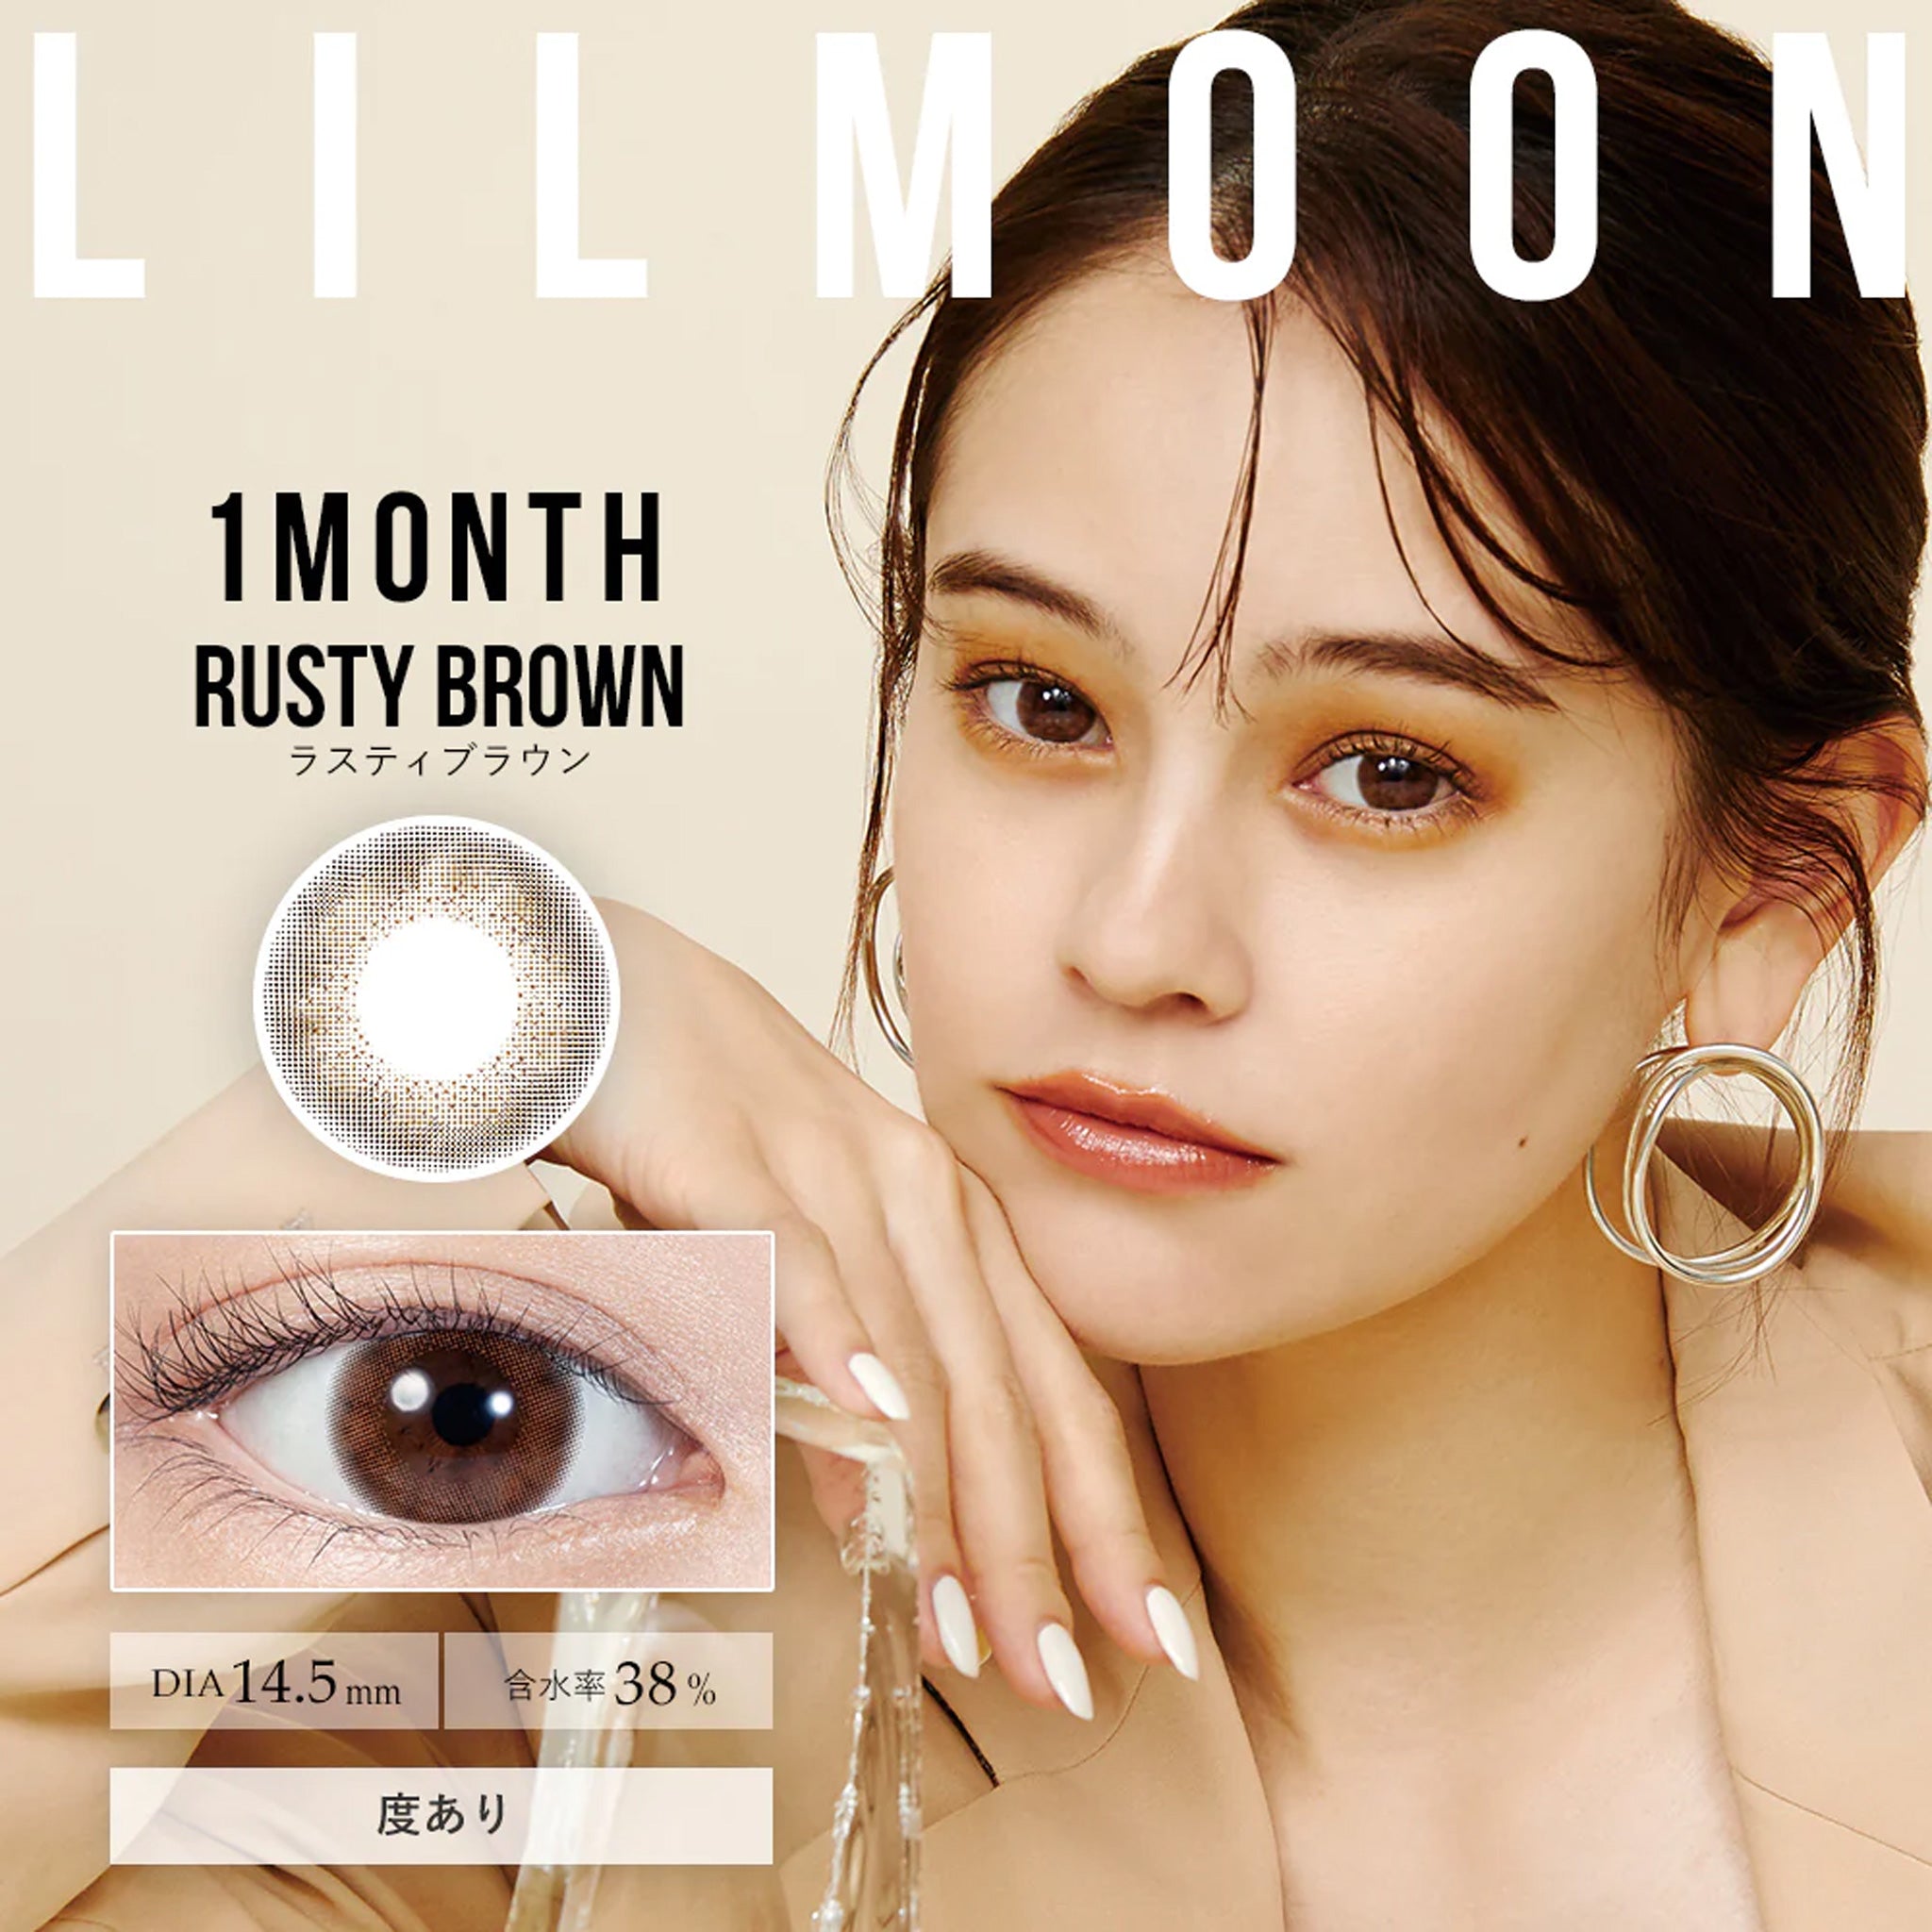 LIL MOON Monthly Contact Lenses-Rusty Brown